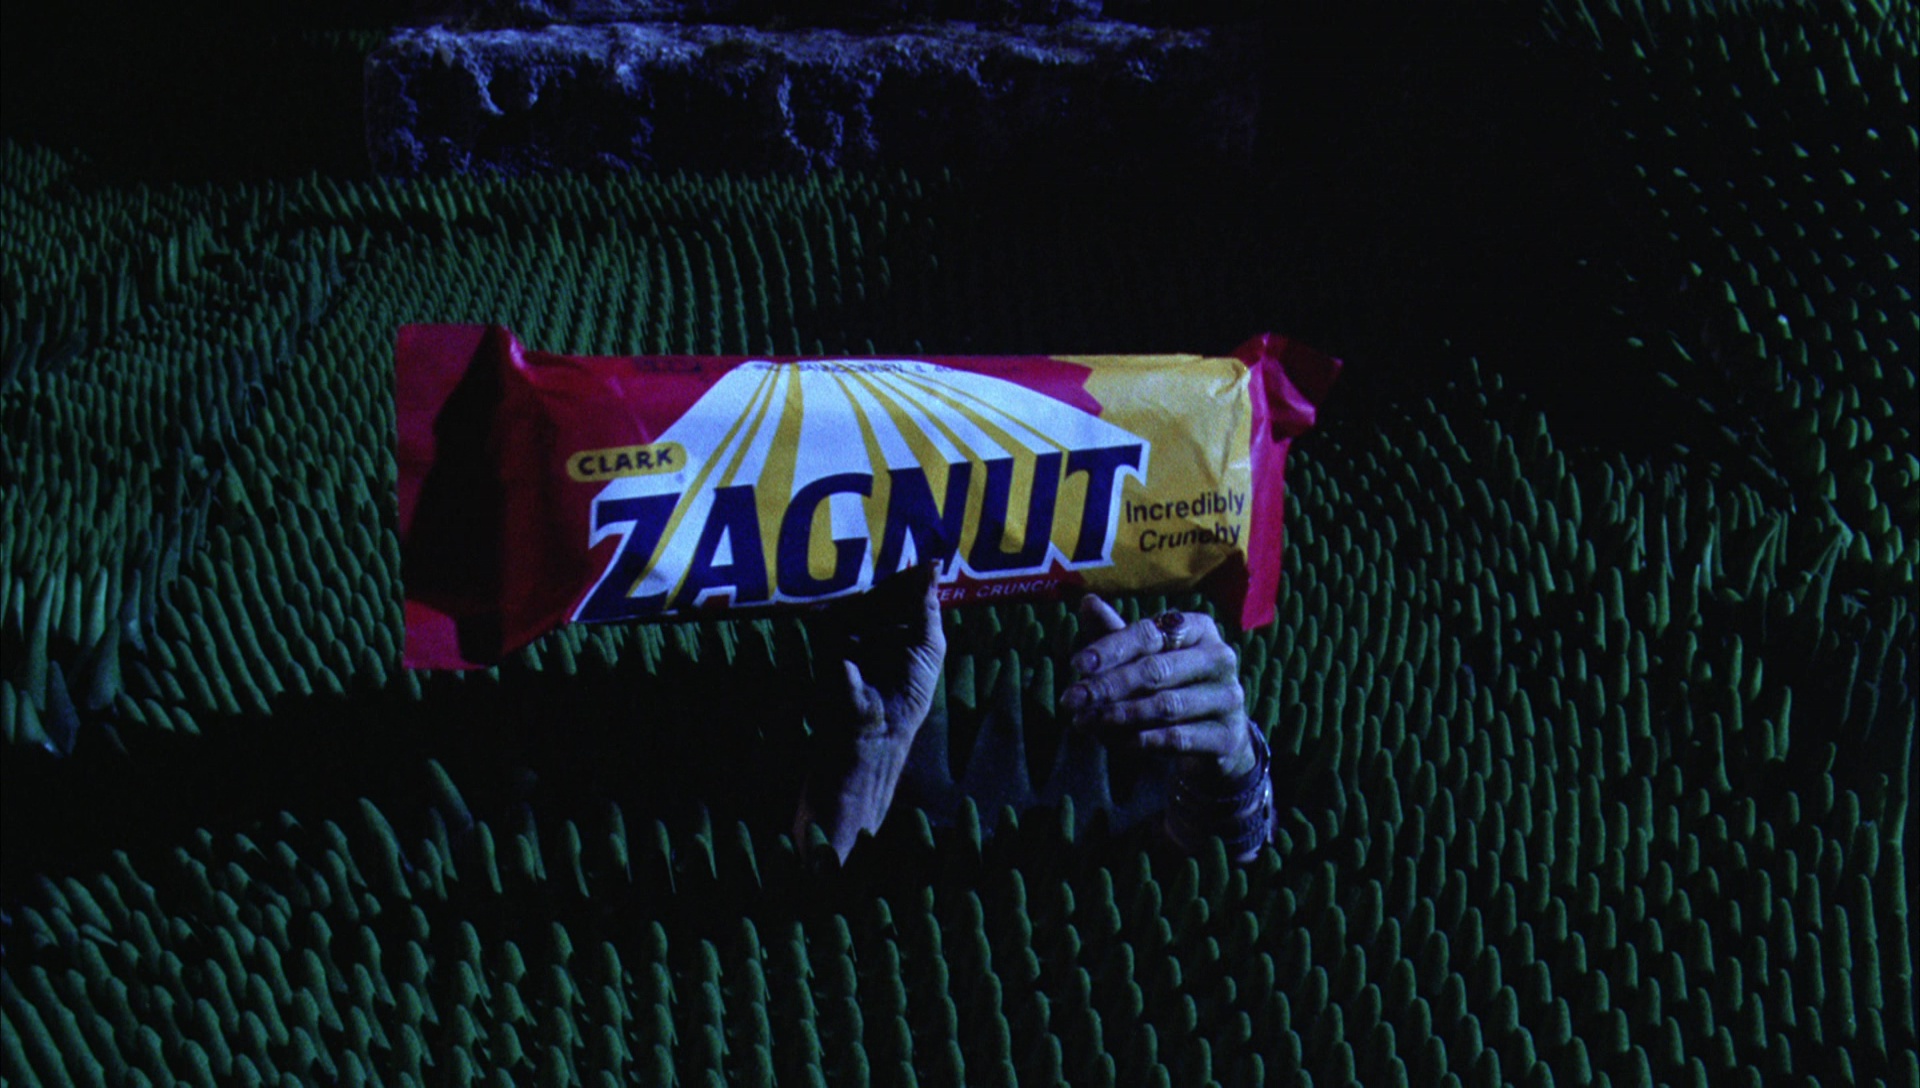 Beetlejuice, miniaturized, lures a large housefly with a Zagnut candy bar